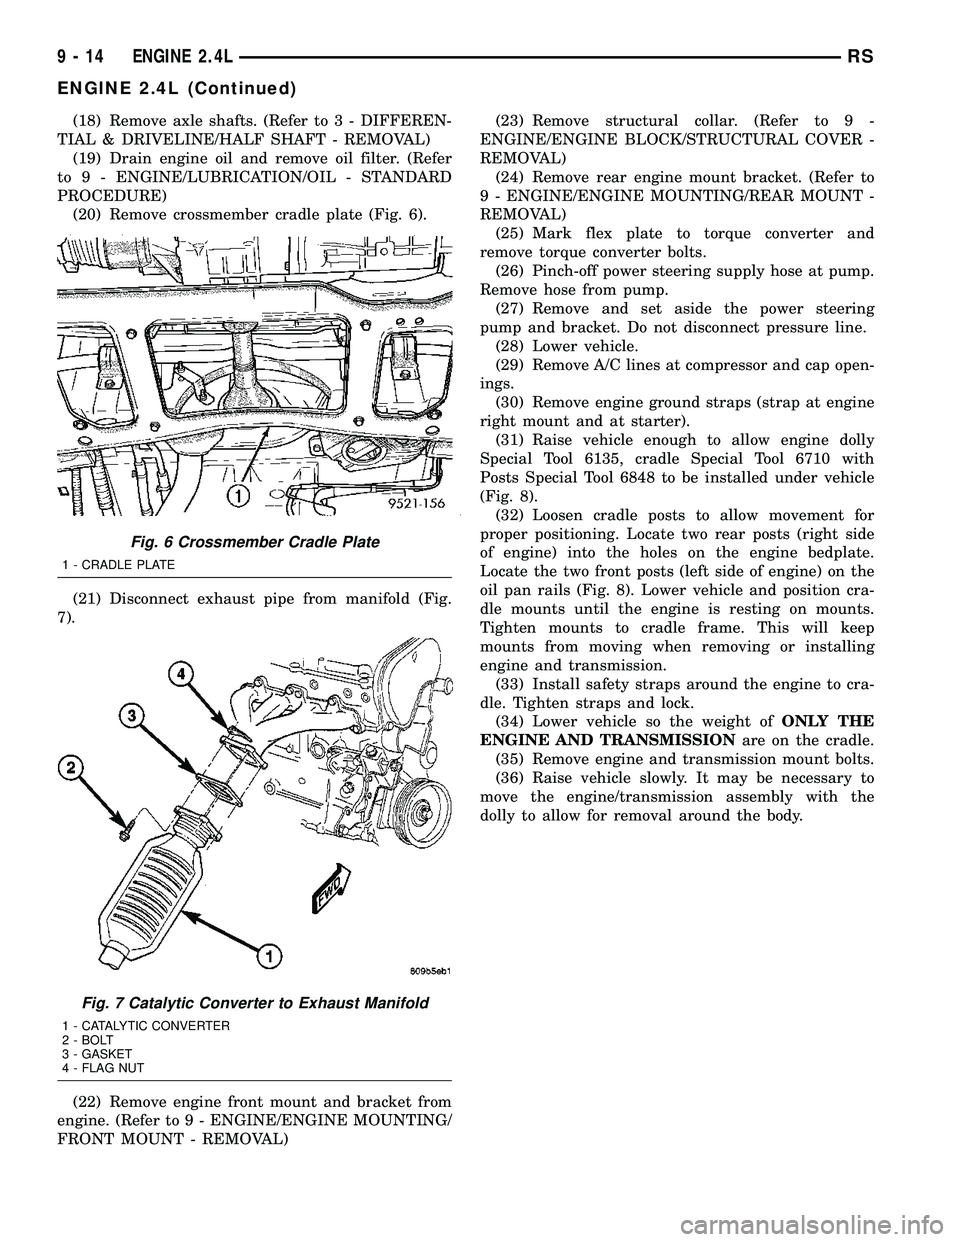 CHRYSLER VOYAGER 2004  Service Manual (18) Remove axle shafts. (Refer to 3 - DIFFEREN-
TIAL & DRIVELINE/HALF SHAFT - REMOVAL)
(19) Drain engine oil and remove oil filter. (Refer
to 9 - ENGINE/LUBRICATION/OIL - STANDARD
PROCEDURE)
(20) Rem